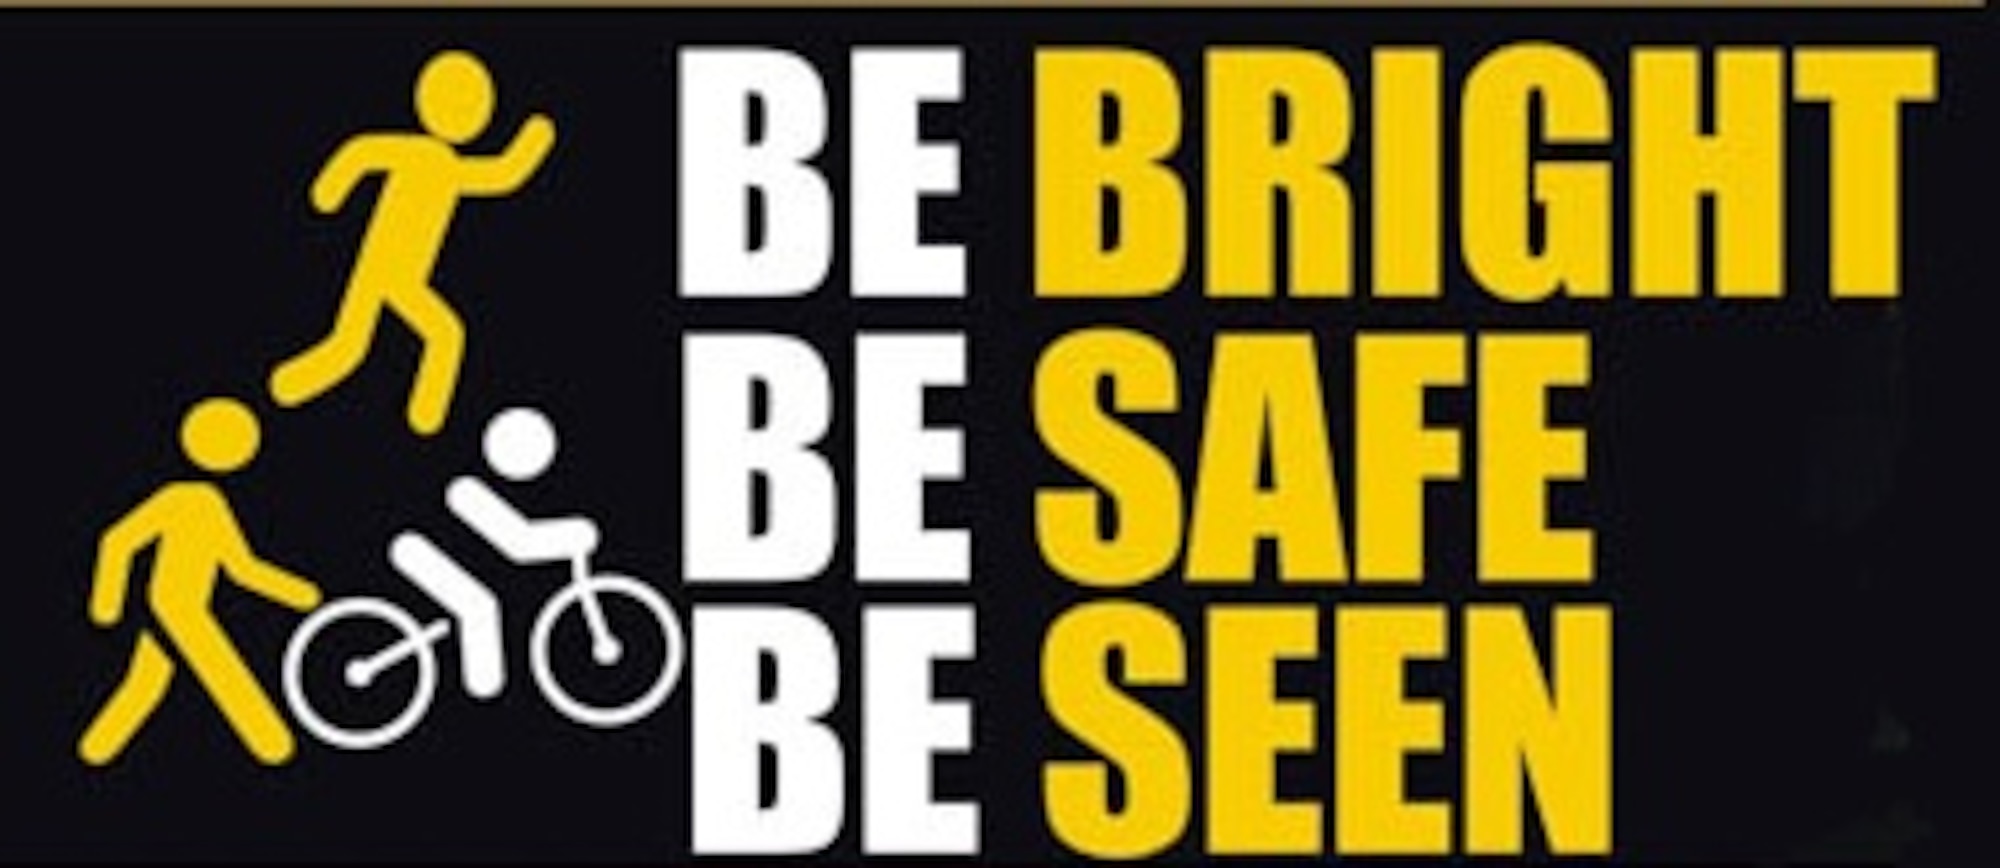 'Be Bright, Be Safe, Be Seen' is aimed at all road users; pedestrians, cyclists’ runners and drivers of all types of vehicles, to highlight the importance of being extra-cautious throughout the year in times of low visibility and darkness.